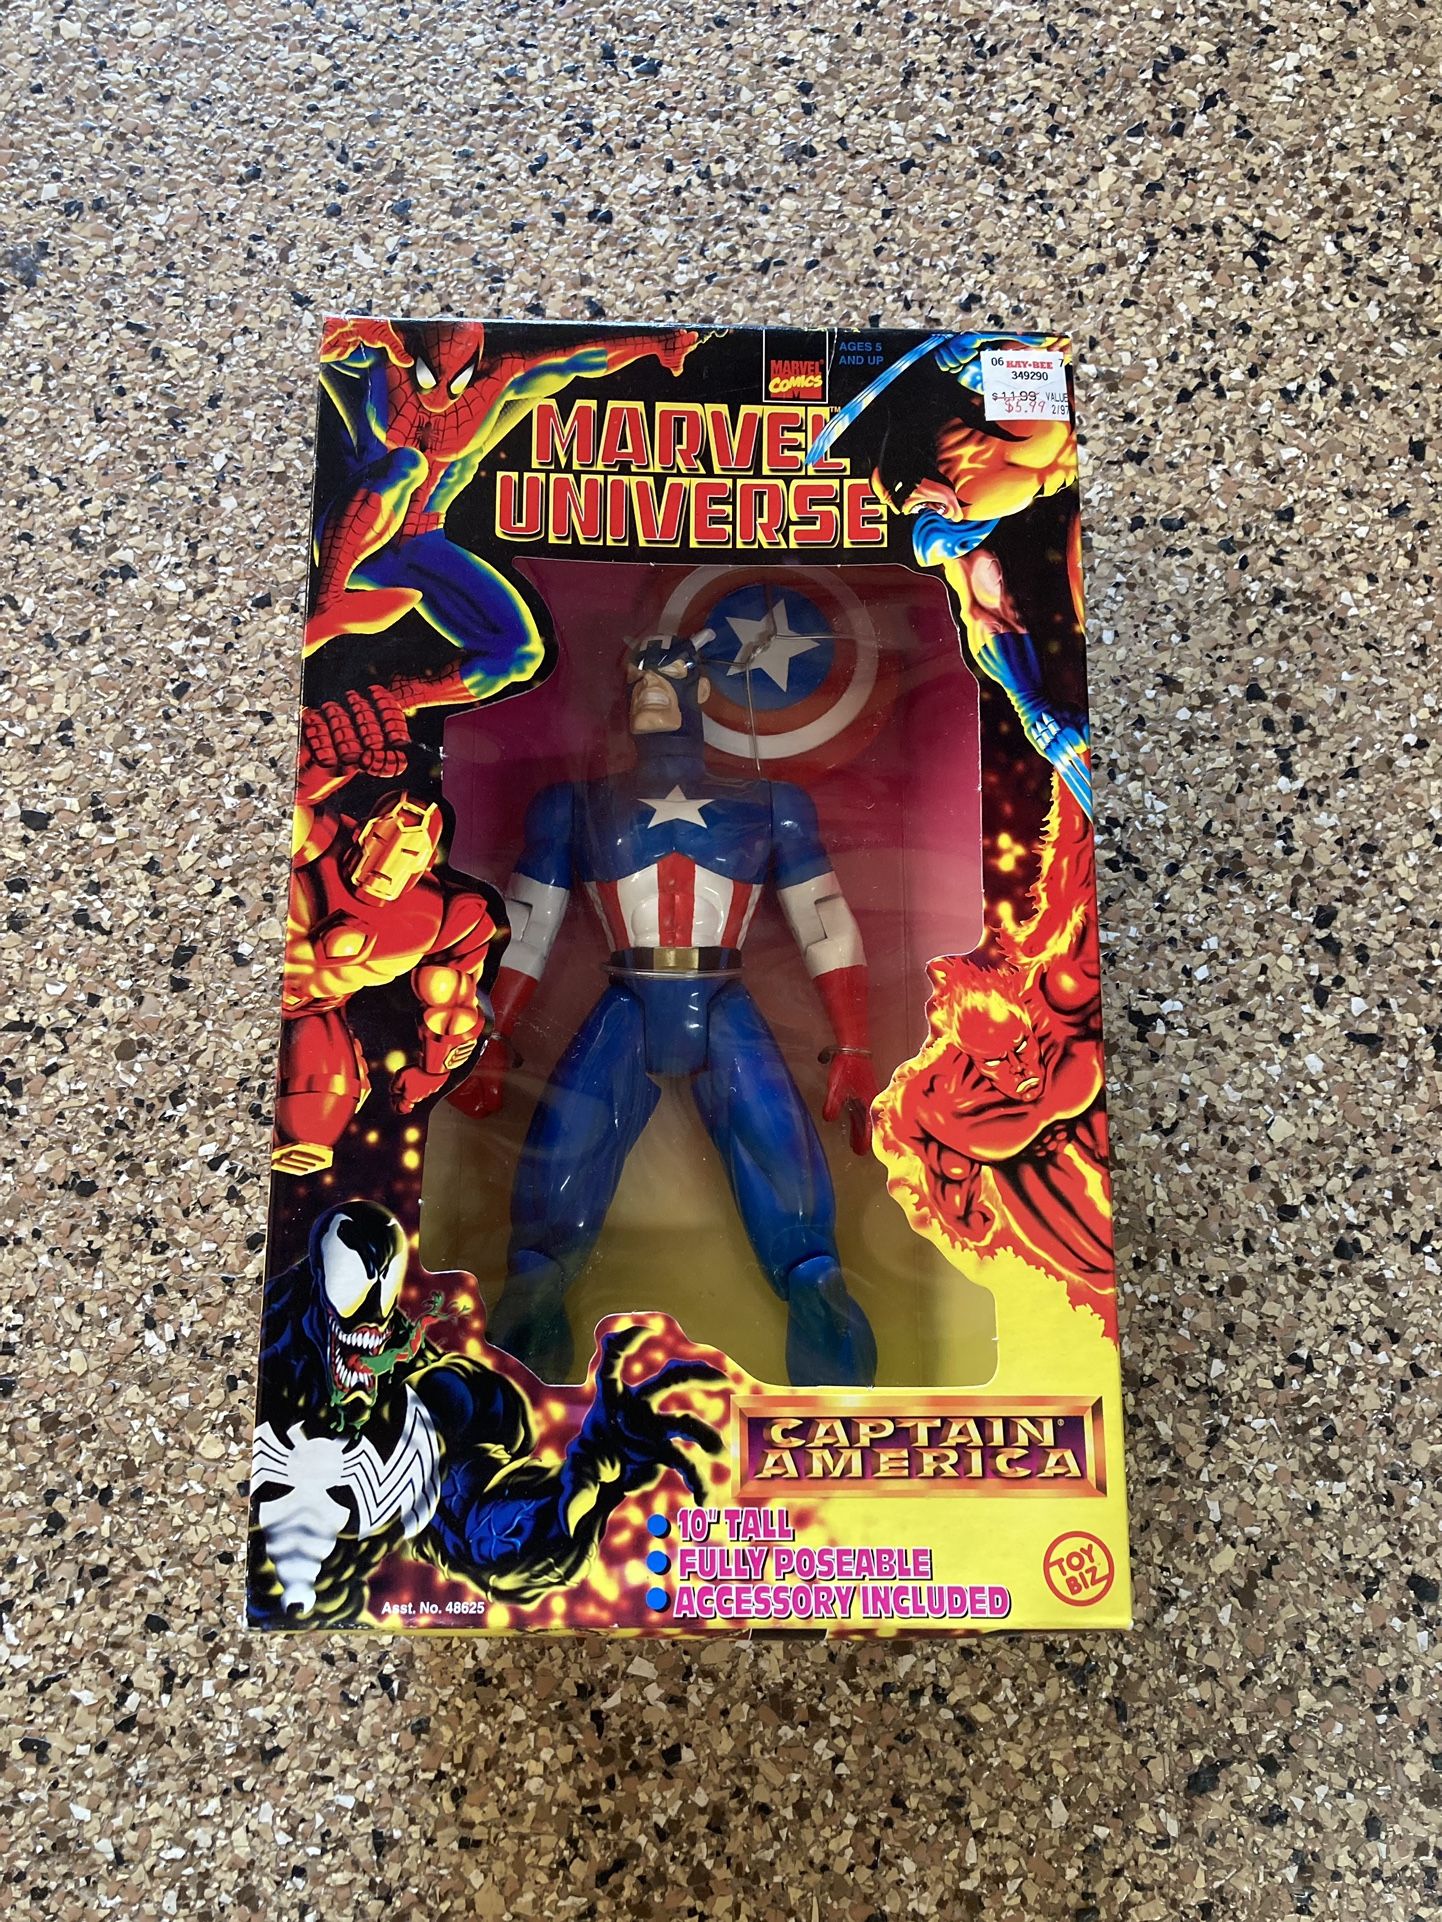 NEW 1997 Marvel Universe Captain America 10" Action Figure by Toy Biz